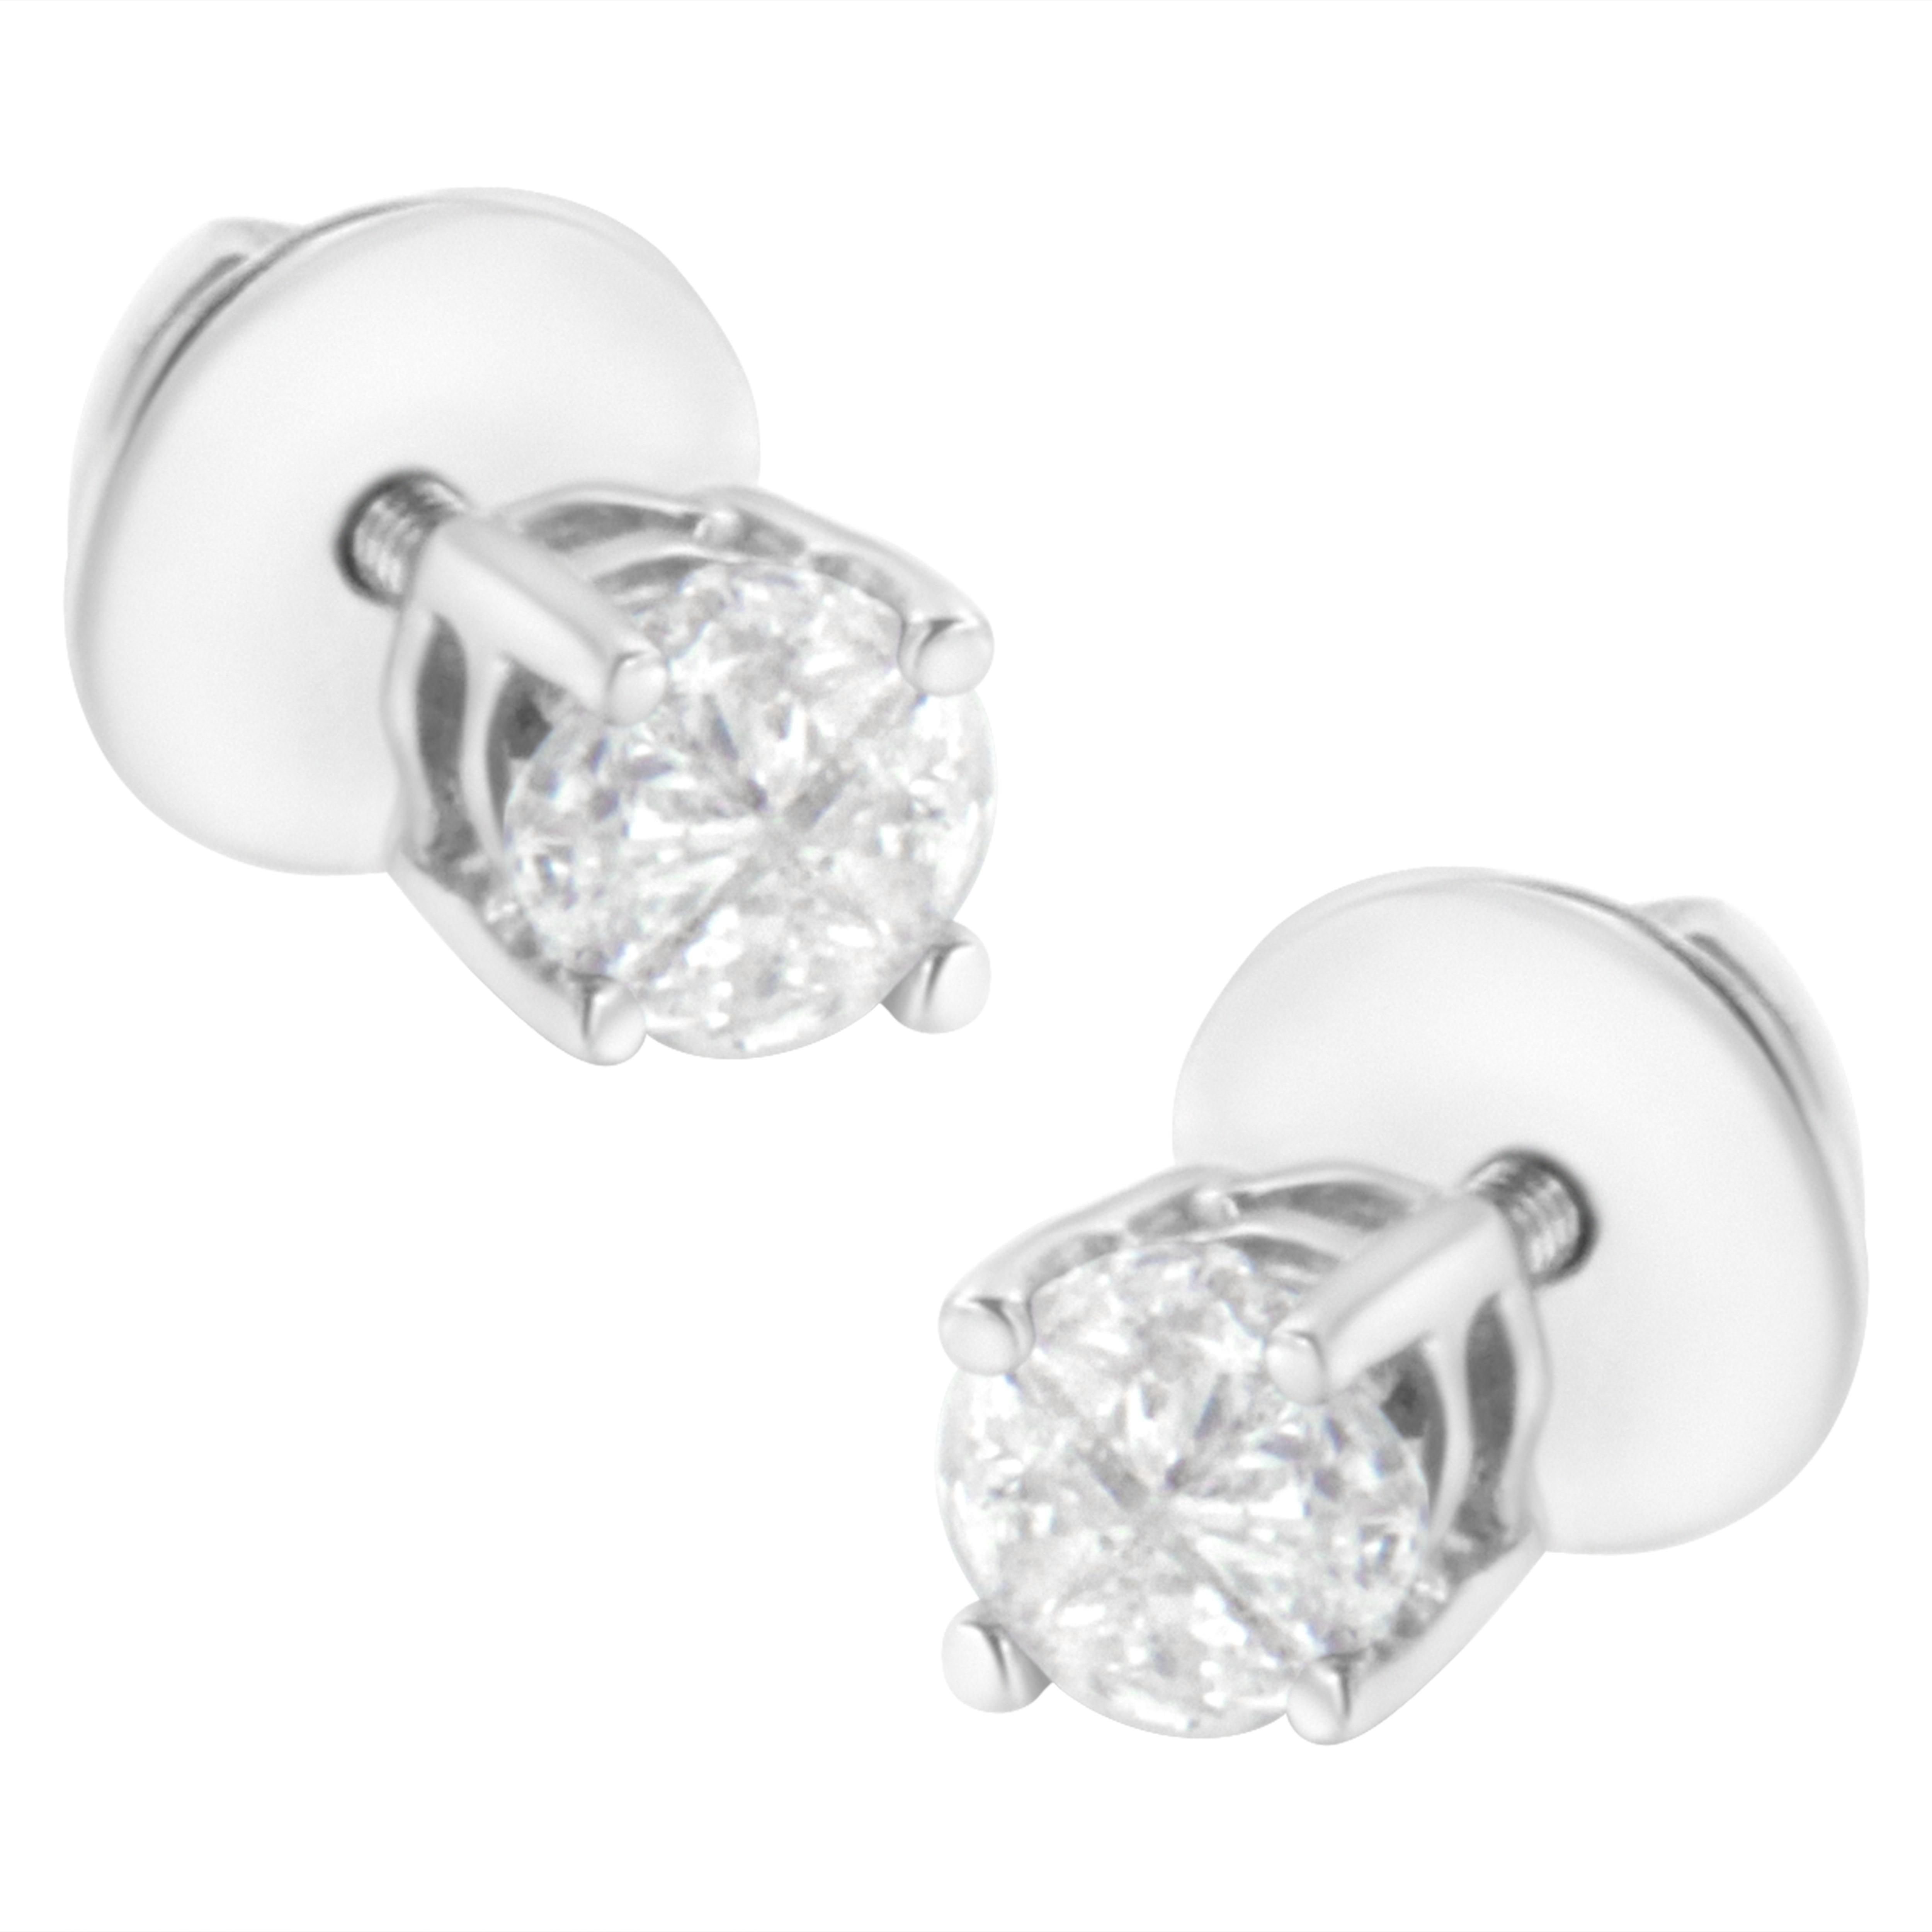 Adorn yourself with these lovely and sparkling solitaire earrings. Each stud is embellished with 4 natural, pie-cut diamonds in a classic prong setting. The 4 pie cuts come together to create the illusion of a round diamond. The diamonds have a